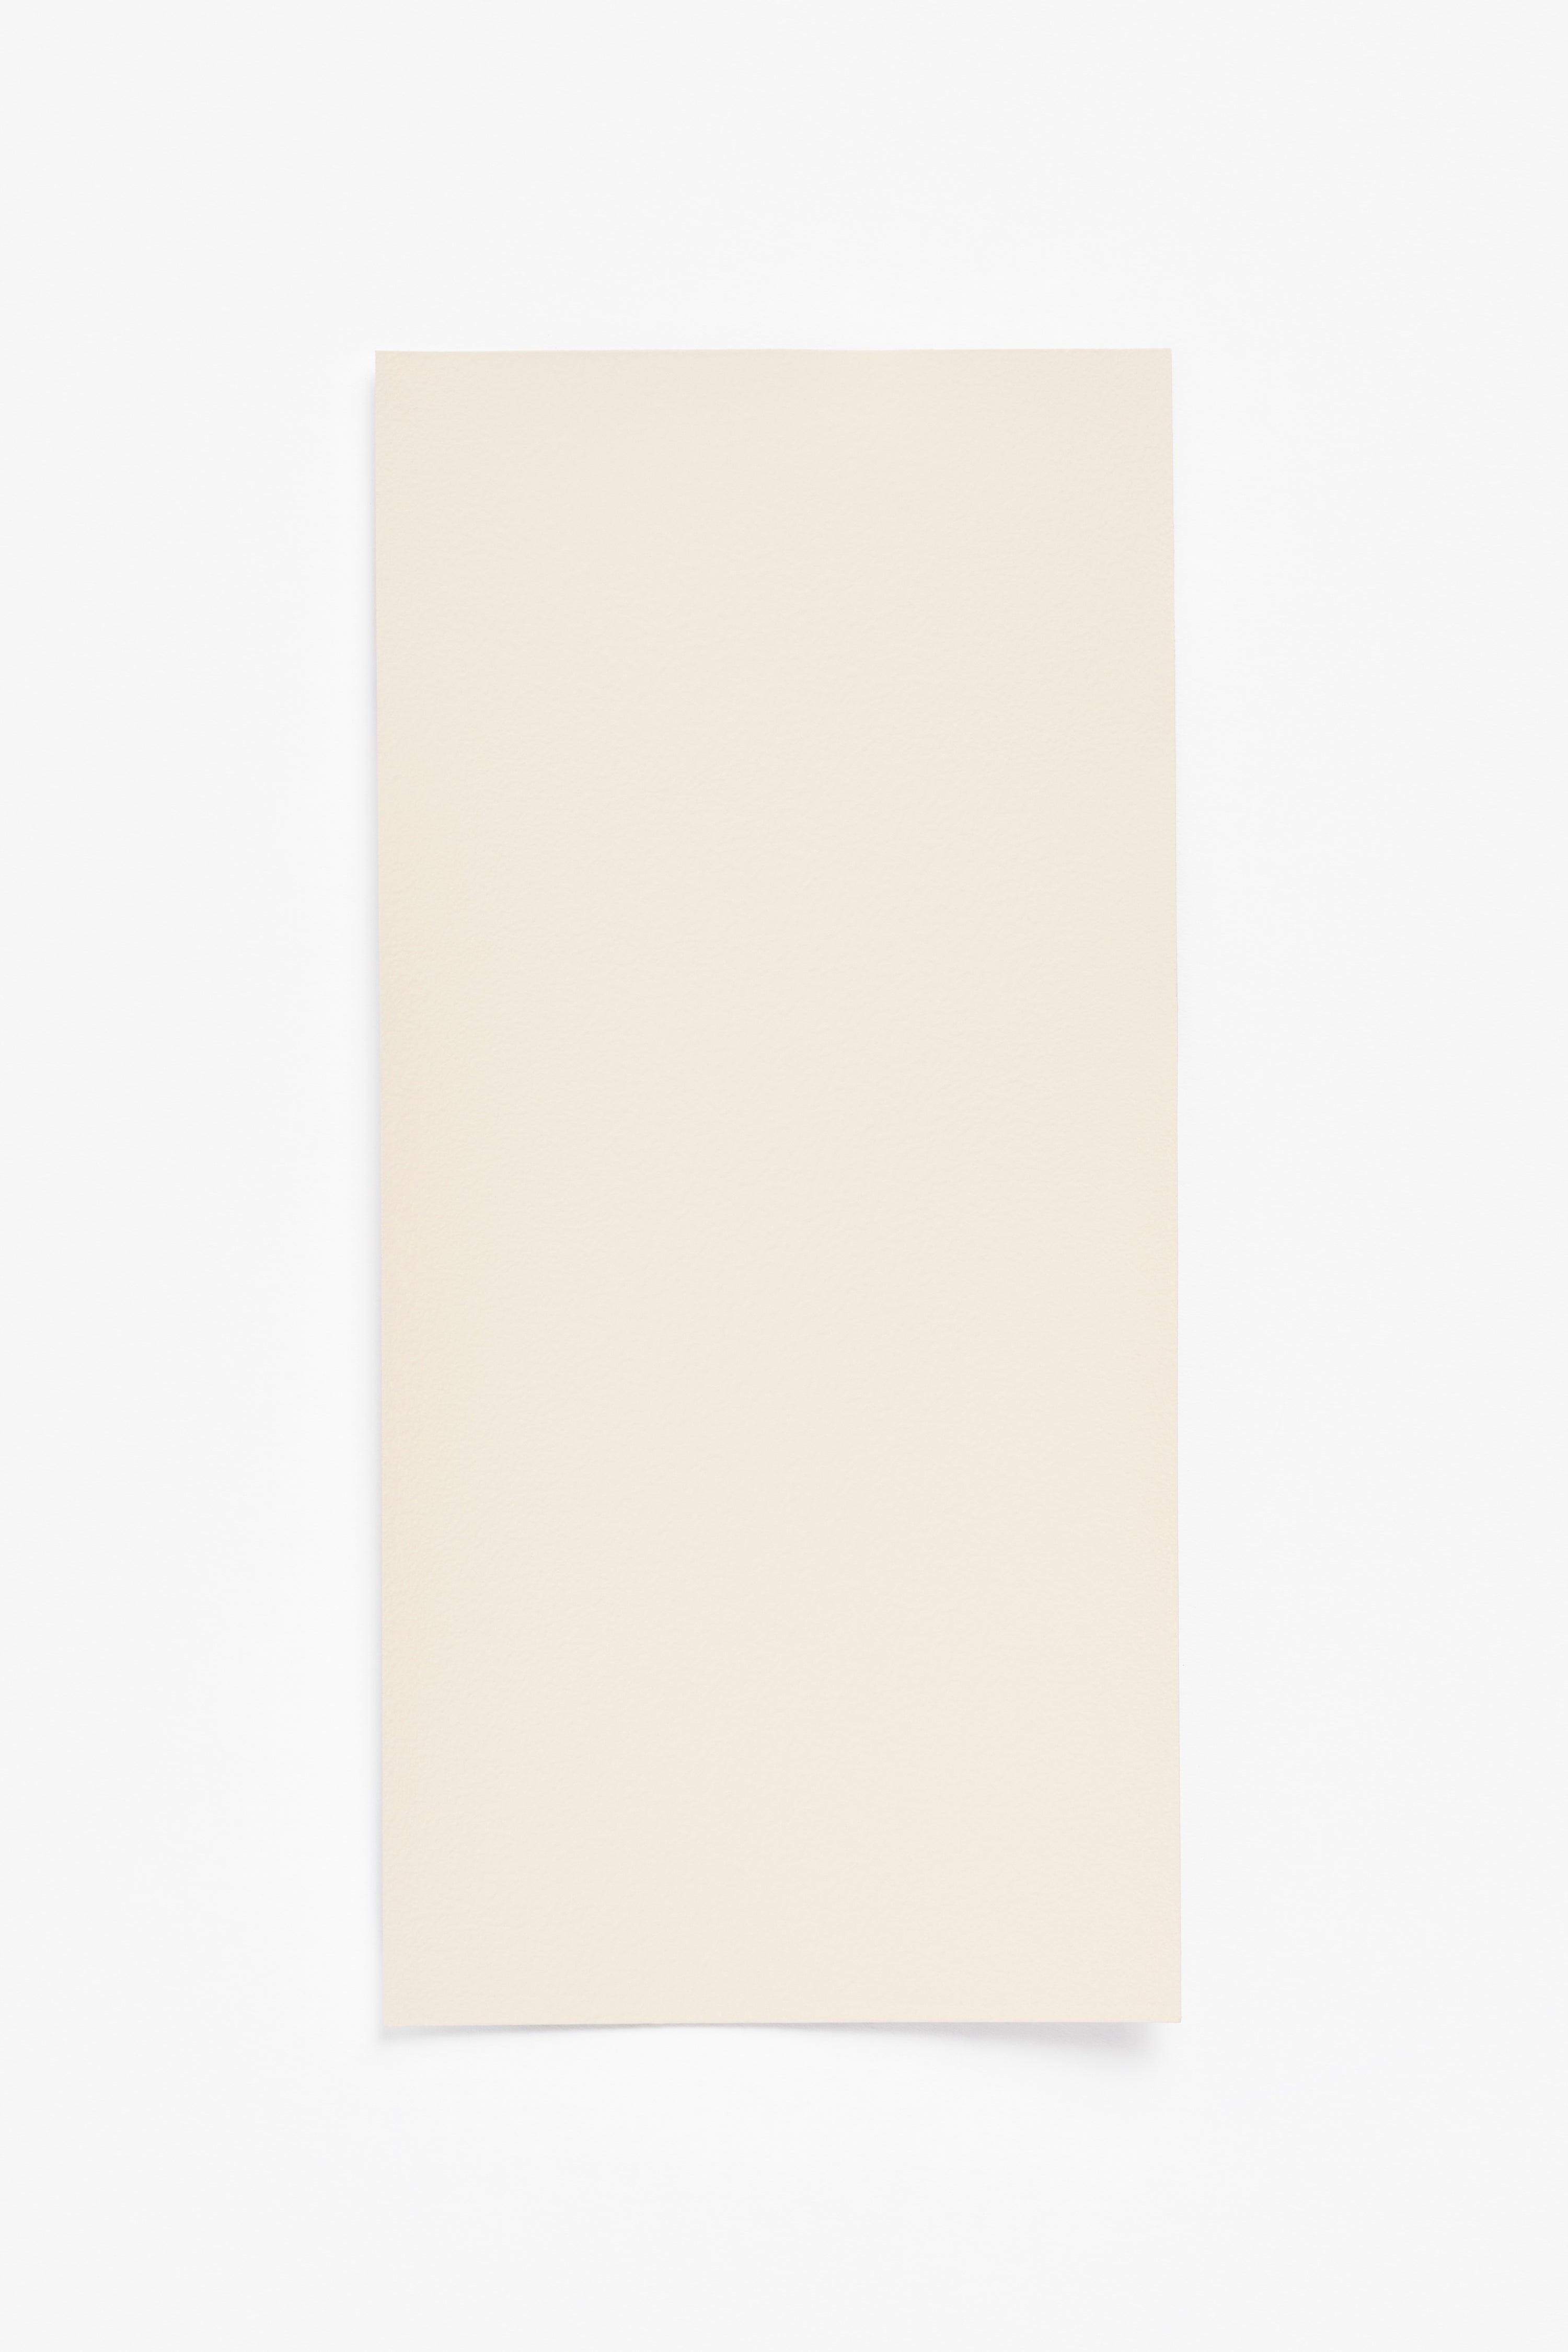 Ivory — a paint colour developed by Halleroed for Blēo